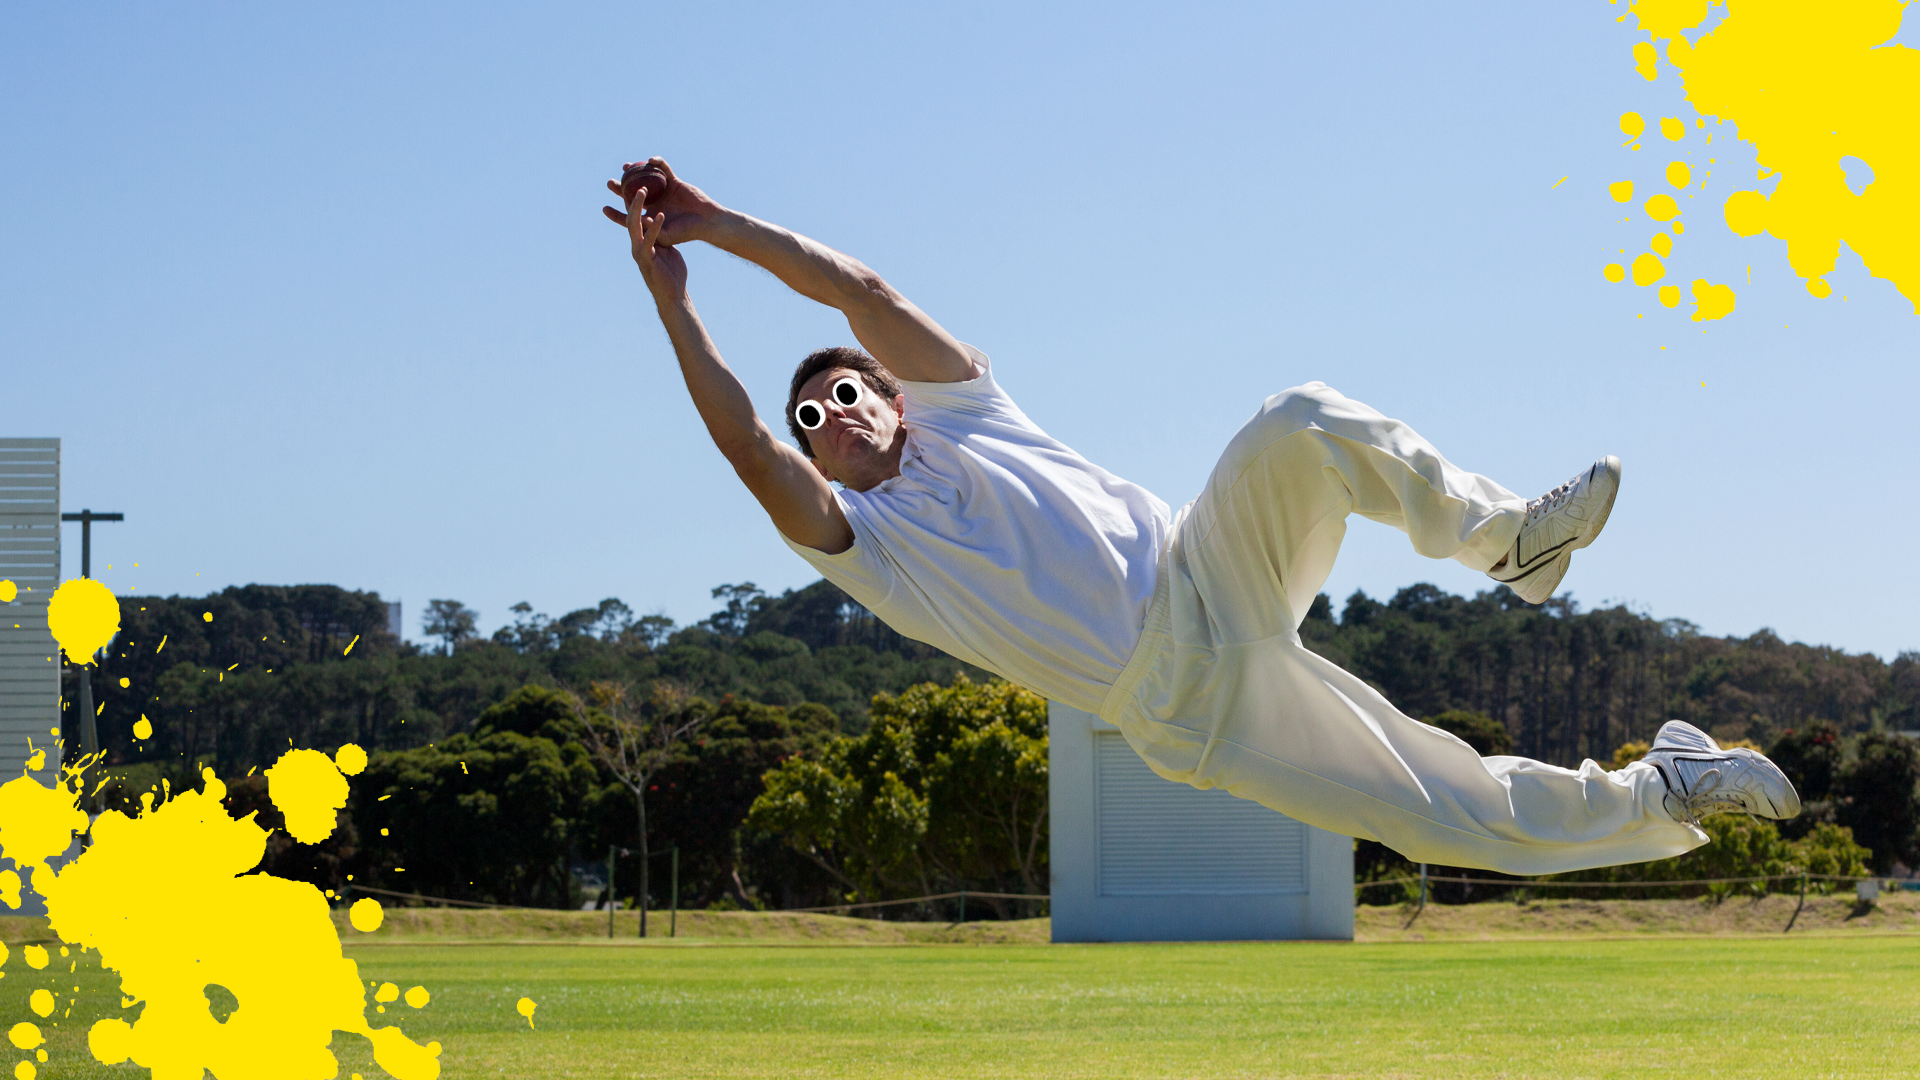 A cricket player making a catch